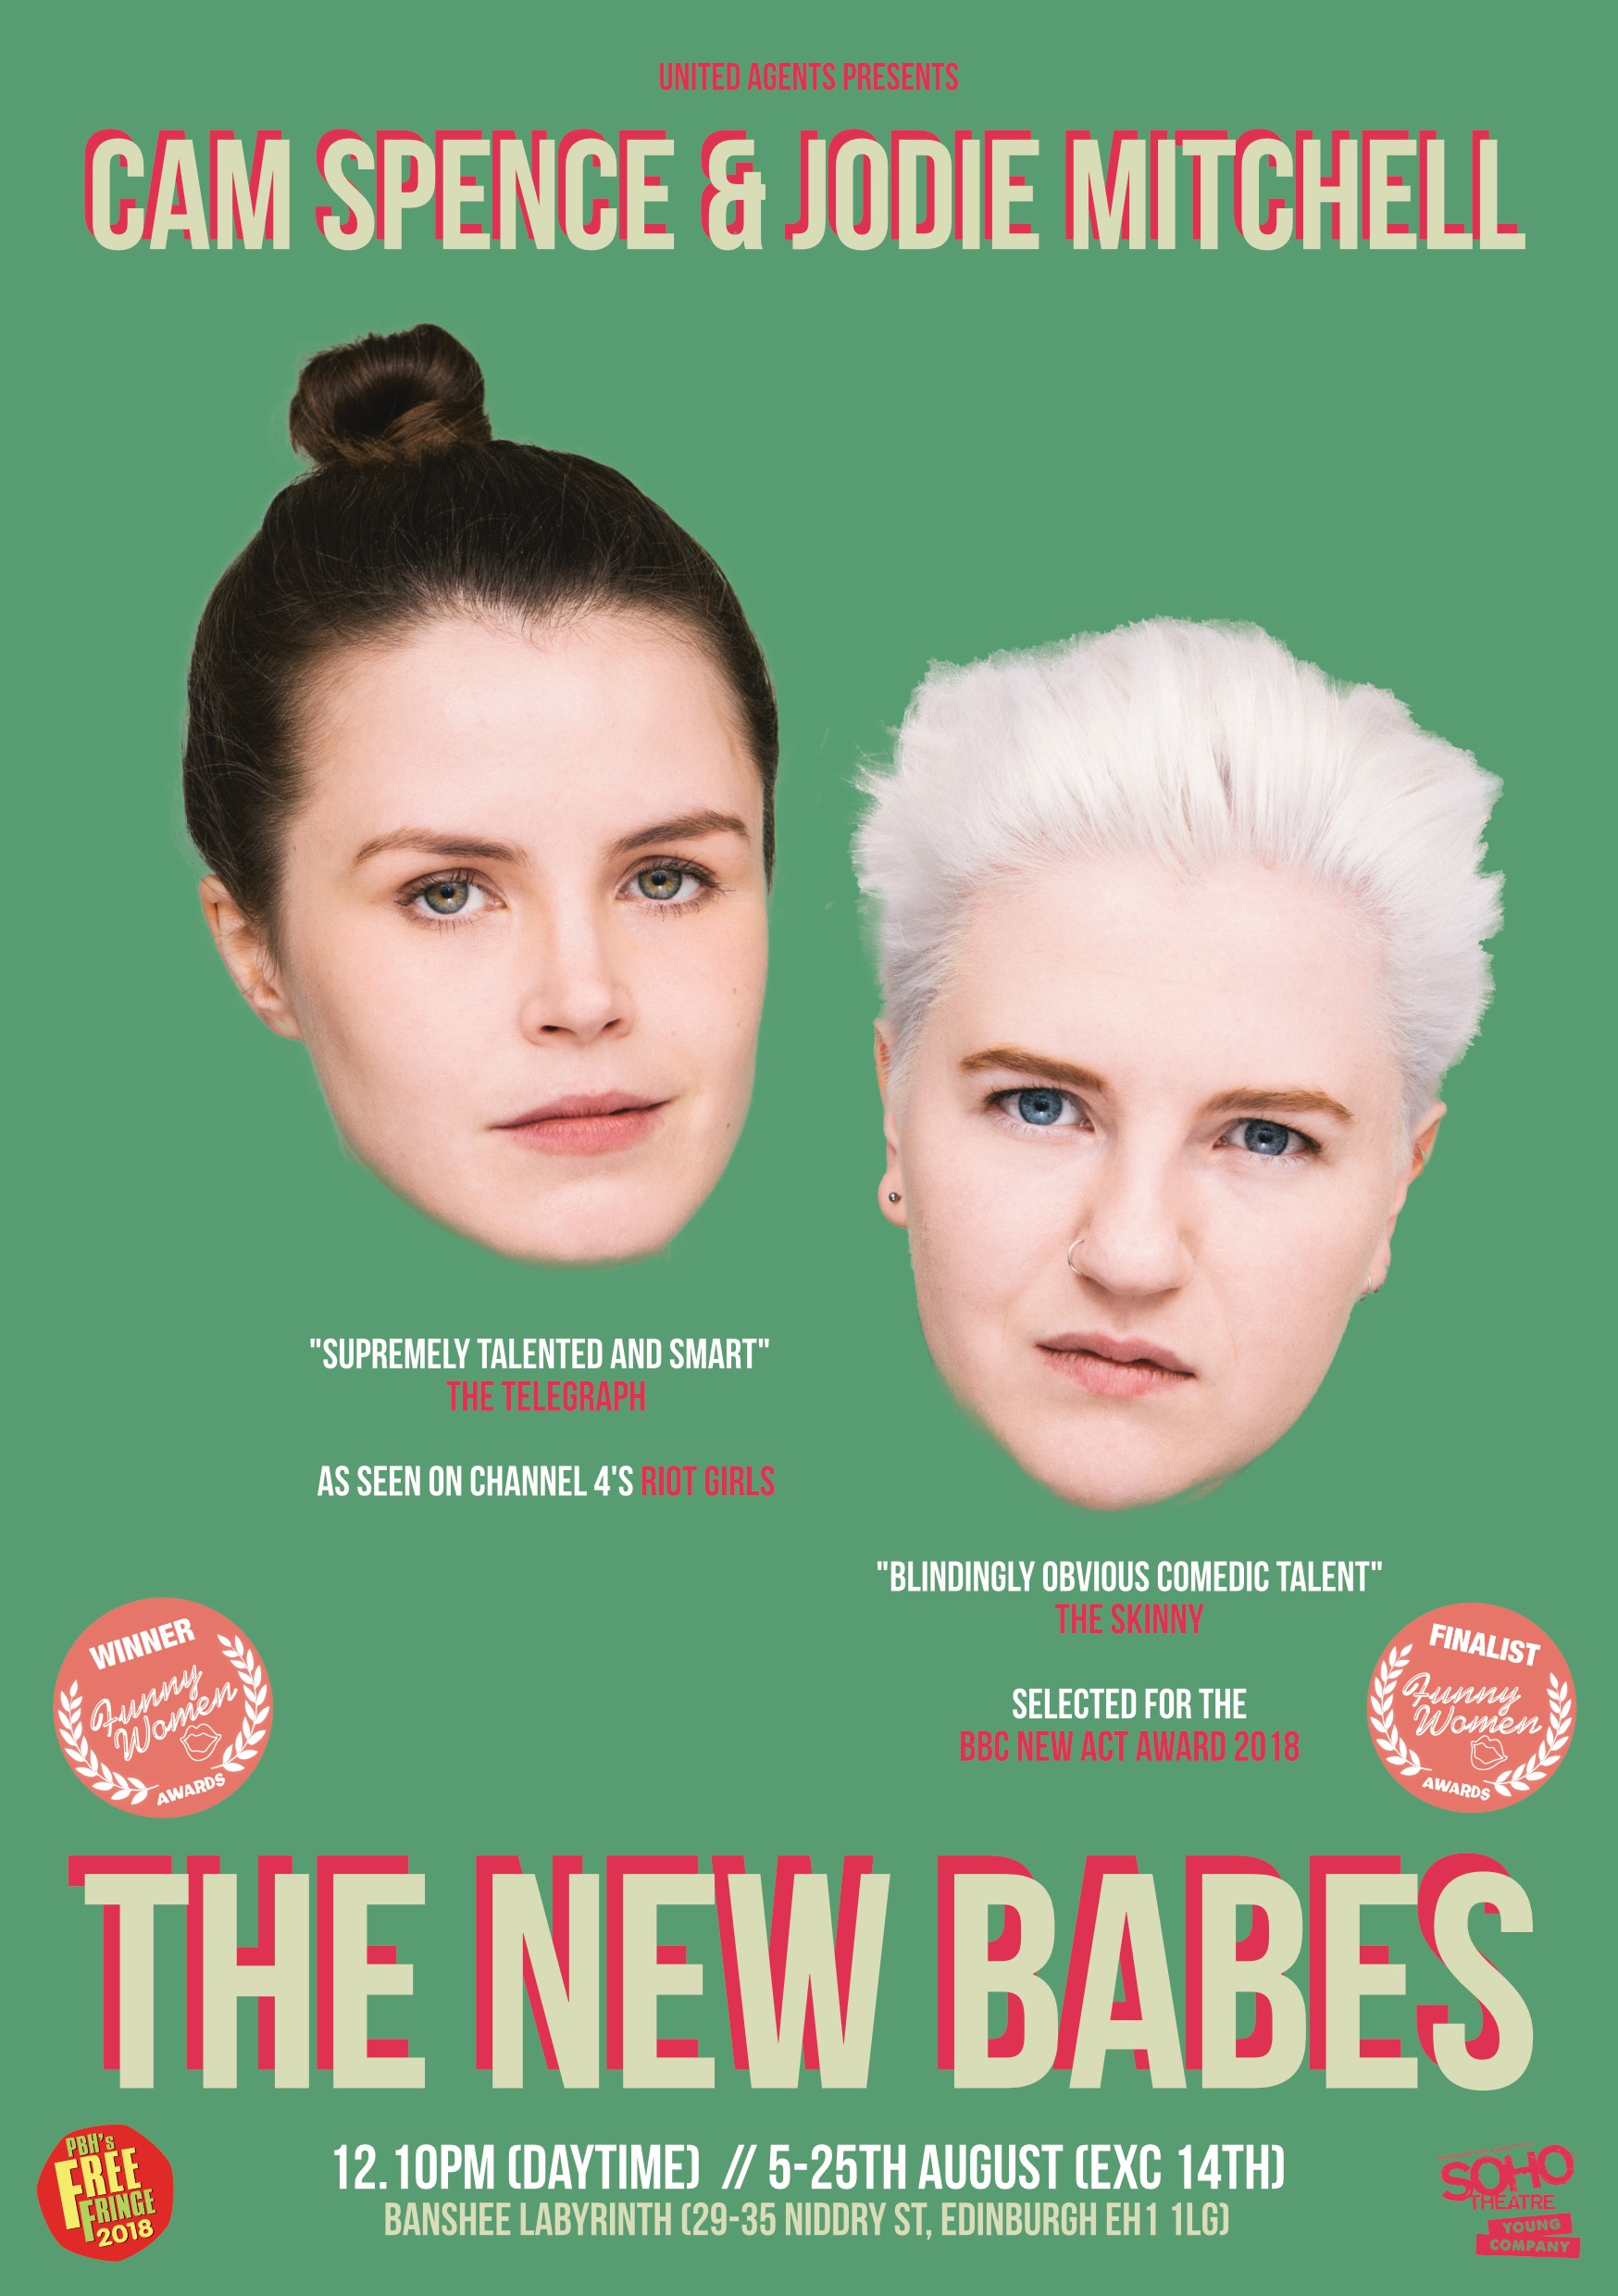 The poster for Cam Spence and Jodie Mitchell: The New Babes